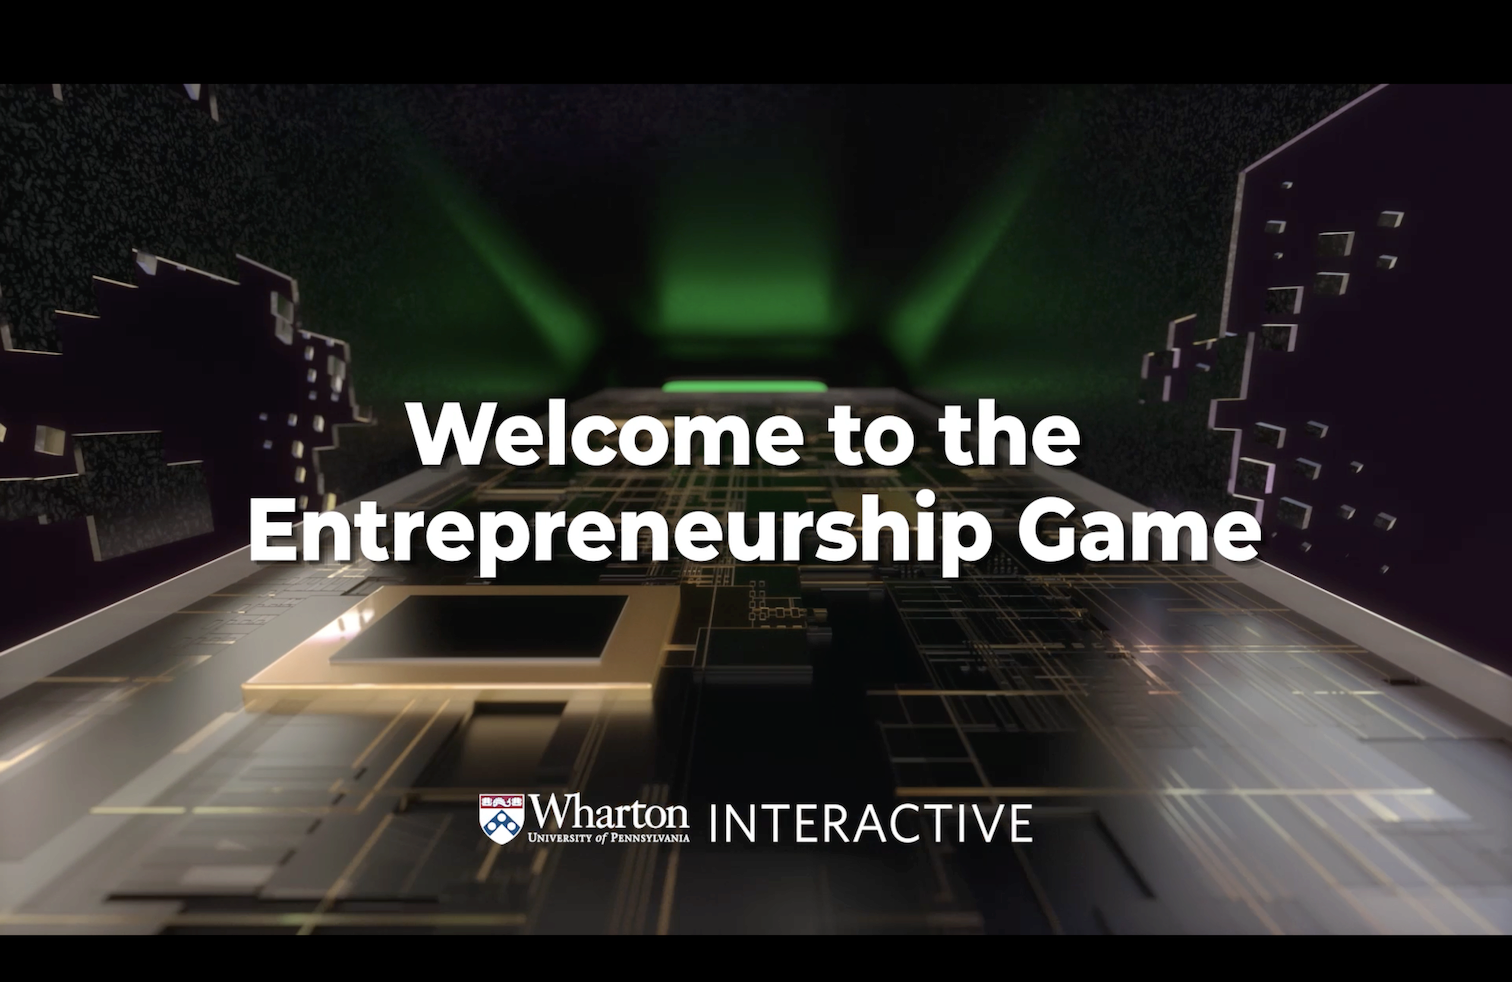 16 Business Simulation Games for Entrepreneurs - Small Business Trends